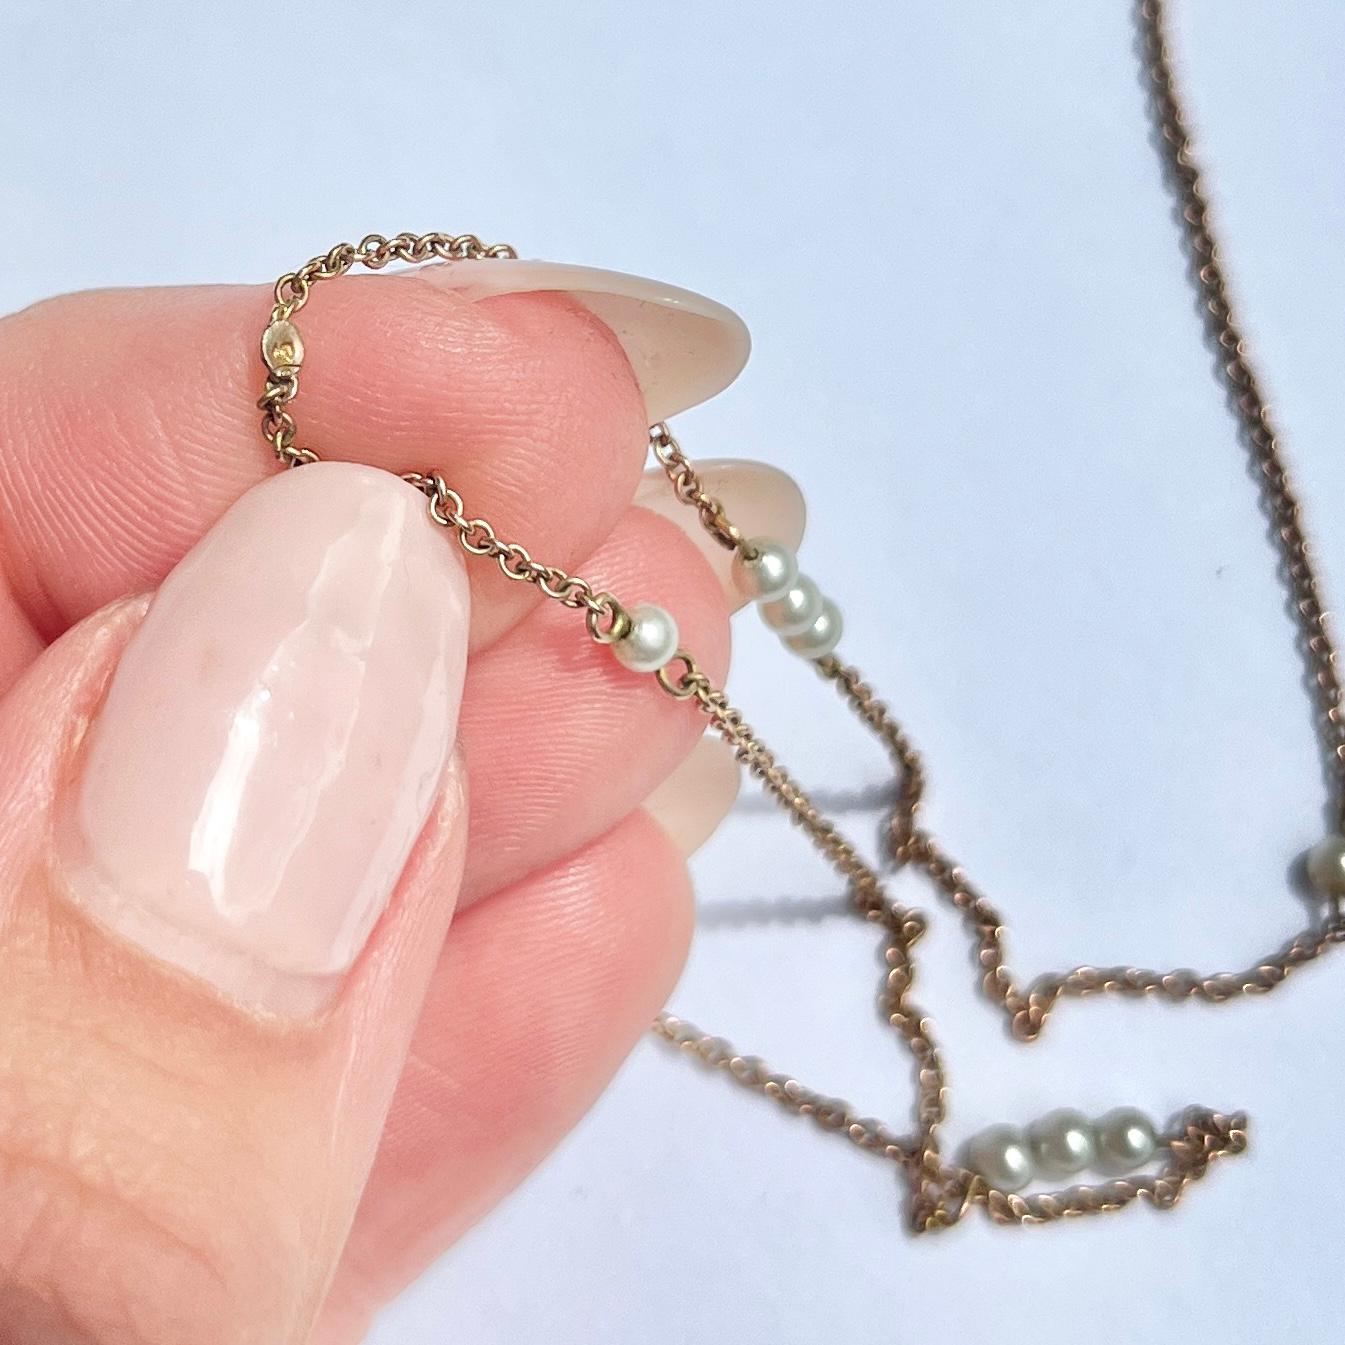 This necklace has a very delicate feel and is made up of a fine 9carat gold chain and holds trios and single pearls. There is no clasp but this is long enough to fit over the head. 

Length: 89cm
Pearl Diameter: 2mm

Weight: 3.8g